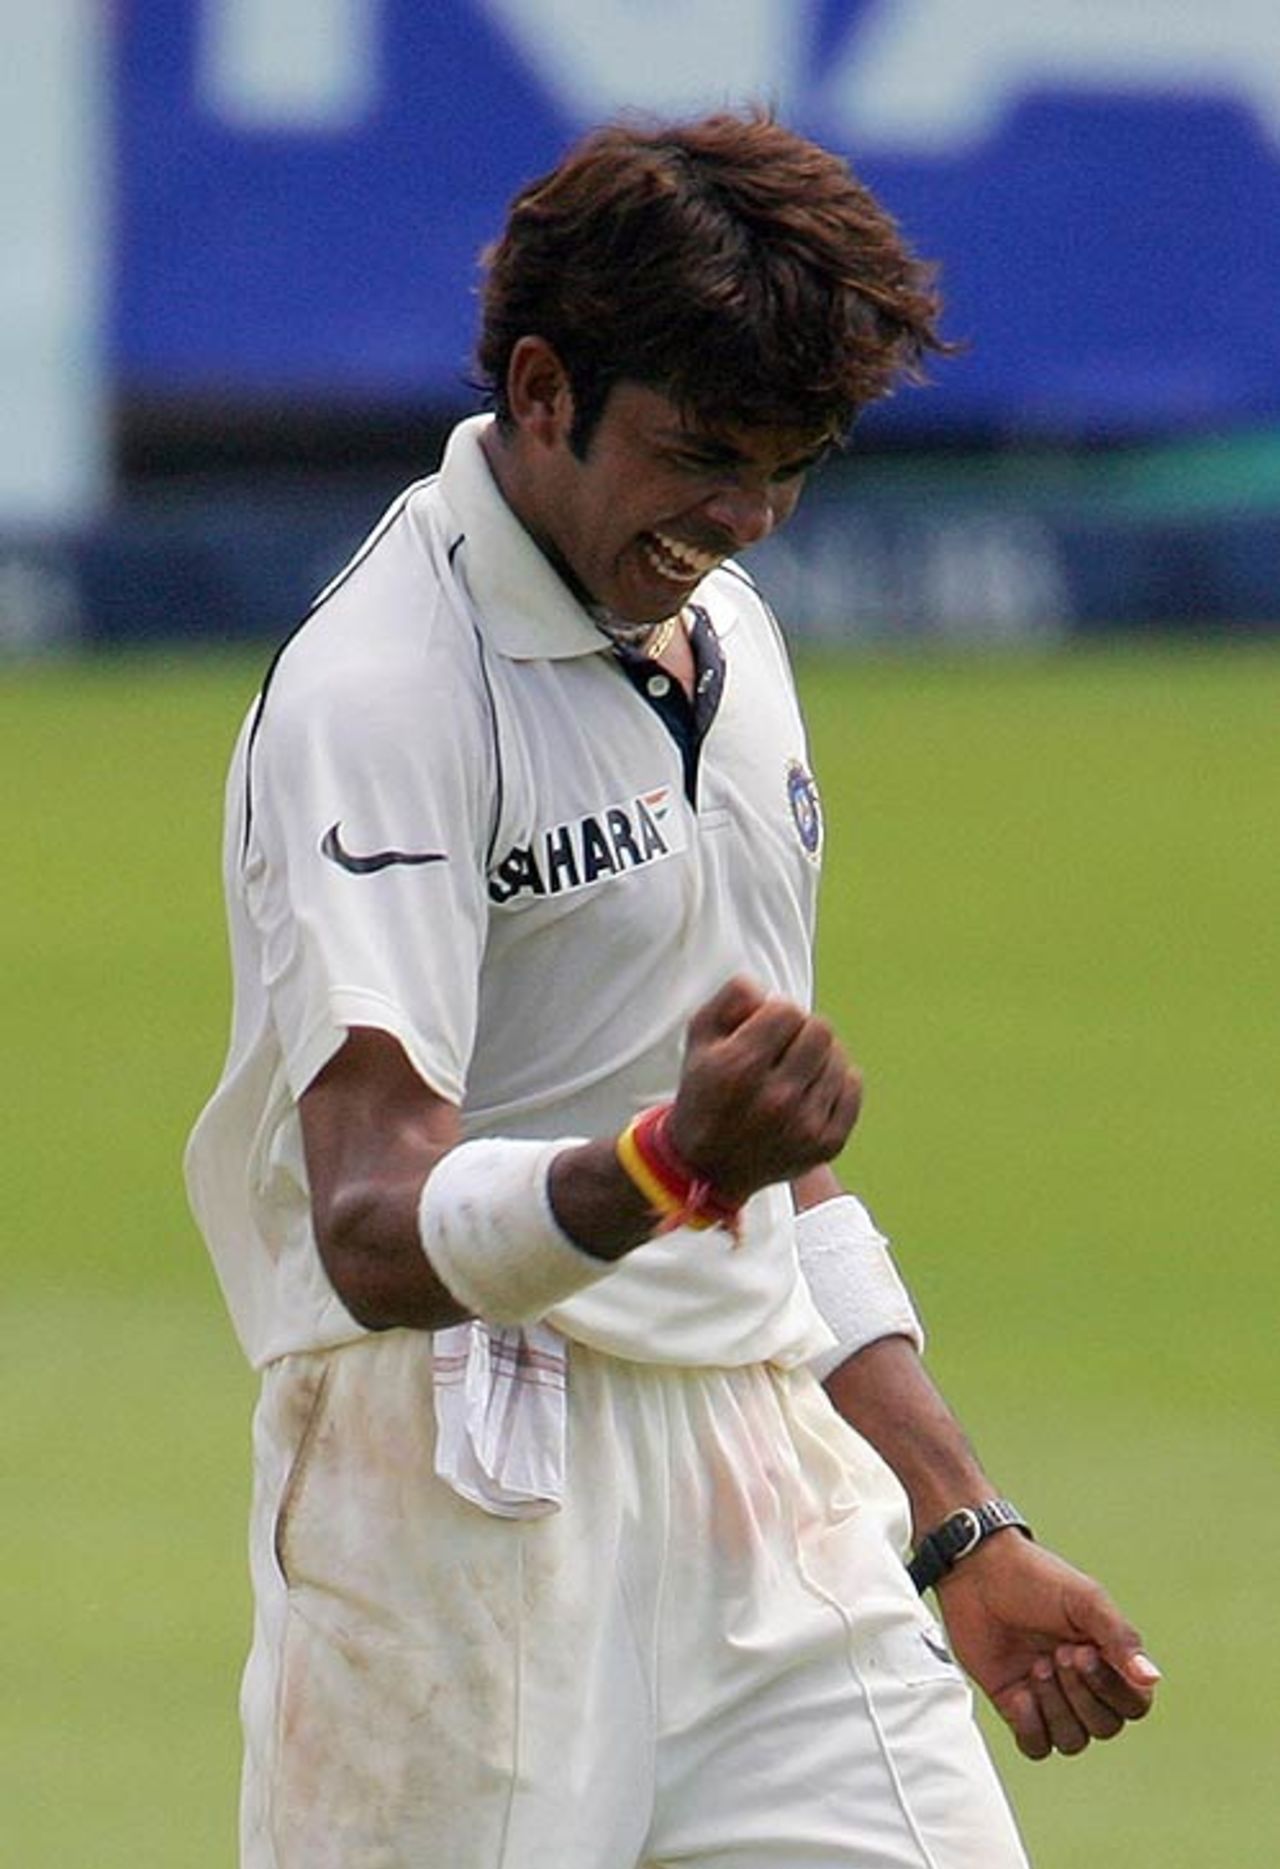 Sreesanth celebrates the wicket of Graeme Smith, South Africa v India, 2nd Test, Durban, 4th day, December 29, 2006